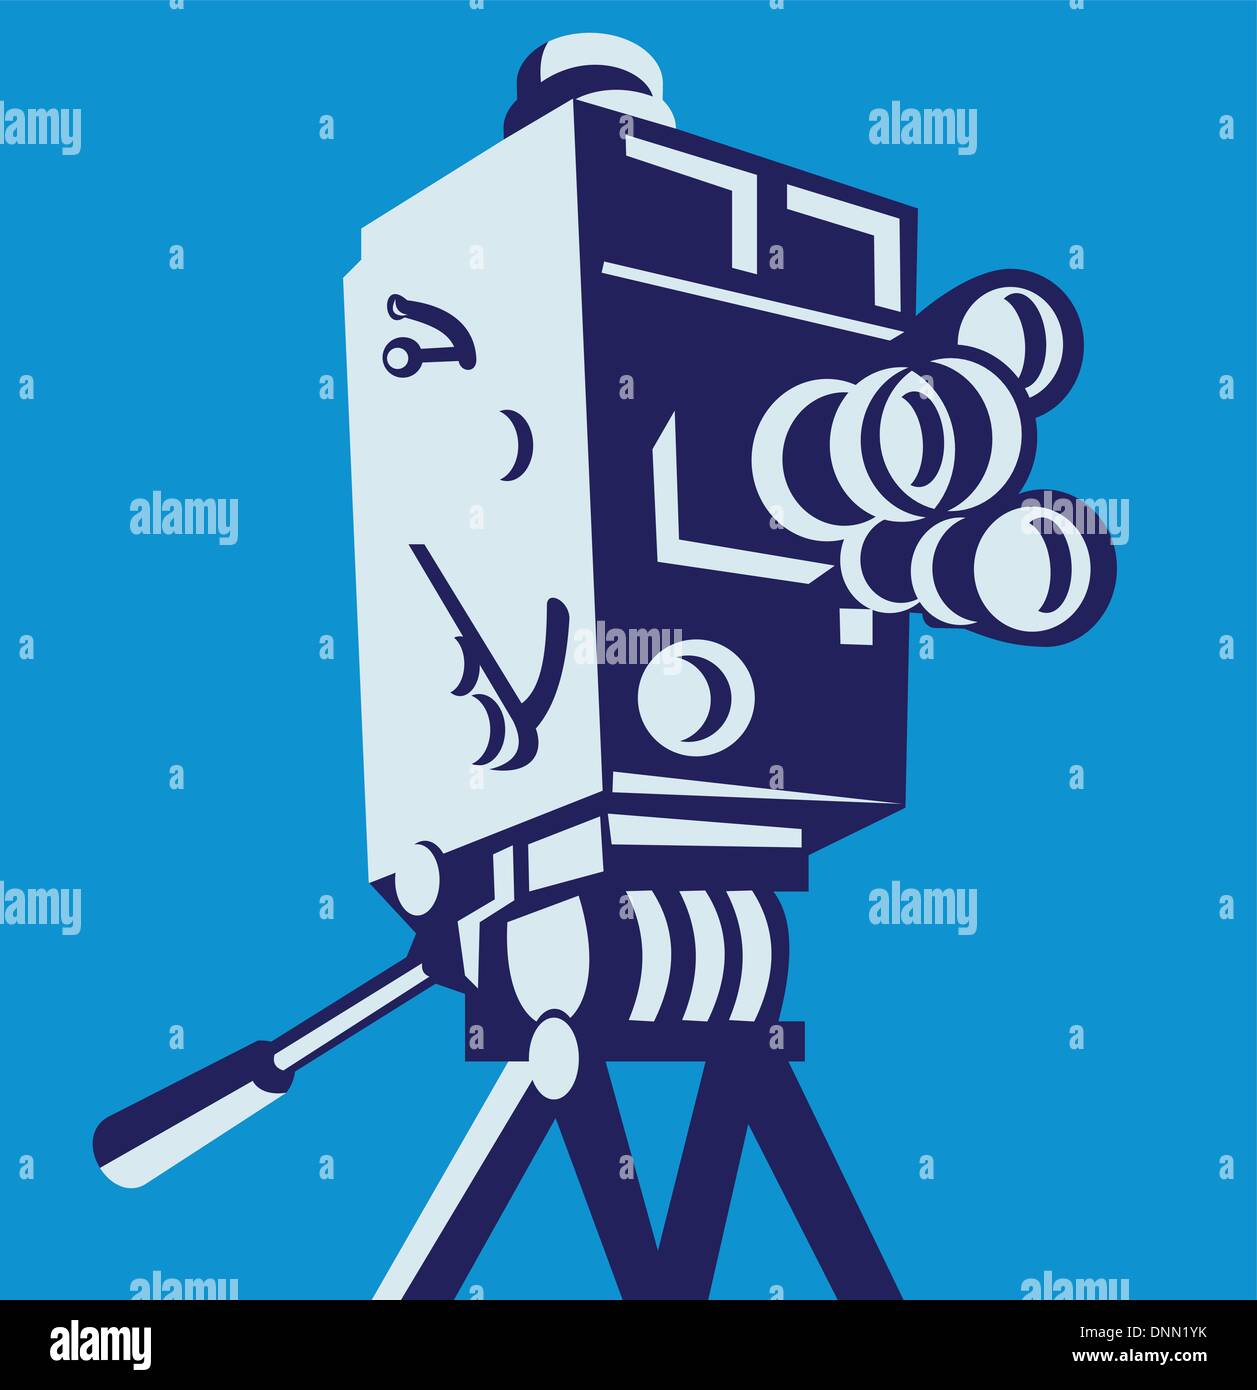 Illustration of a vintage film movie video camera viewed from low angle set inside square done in retro style. Stock Vector